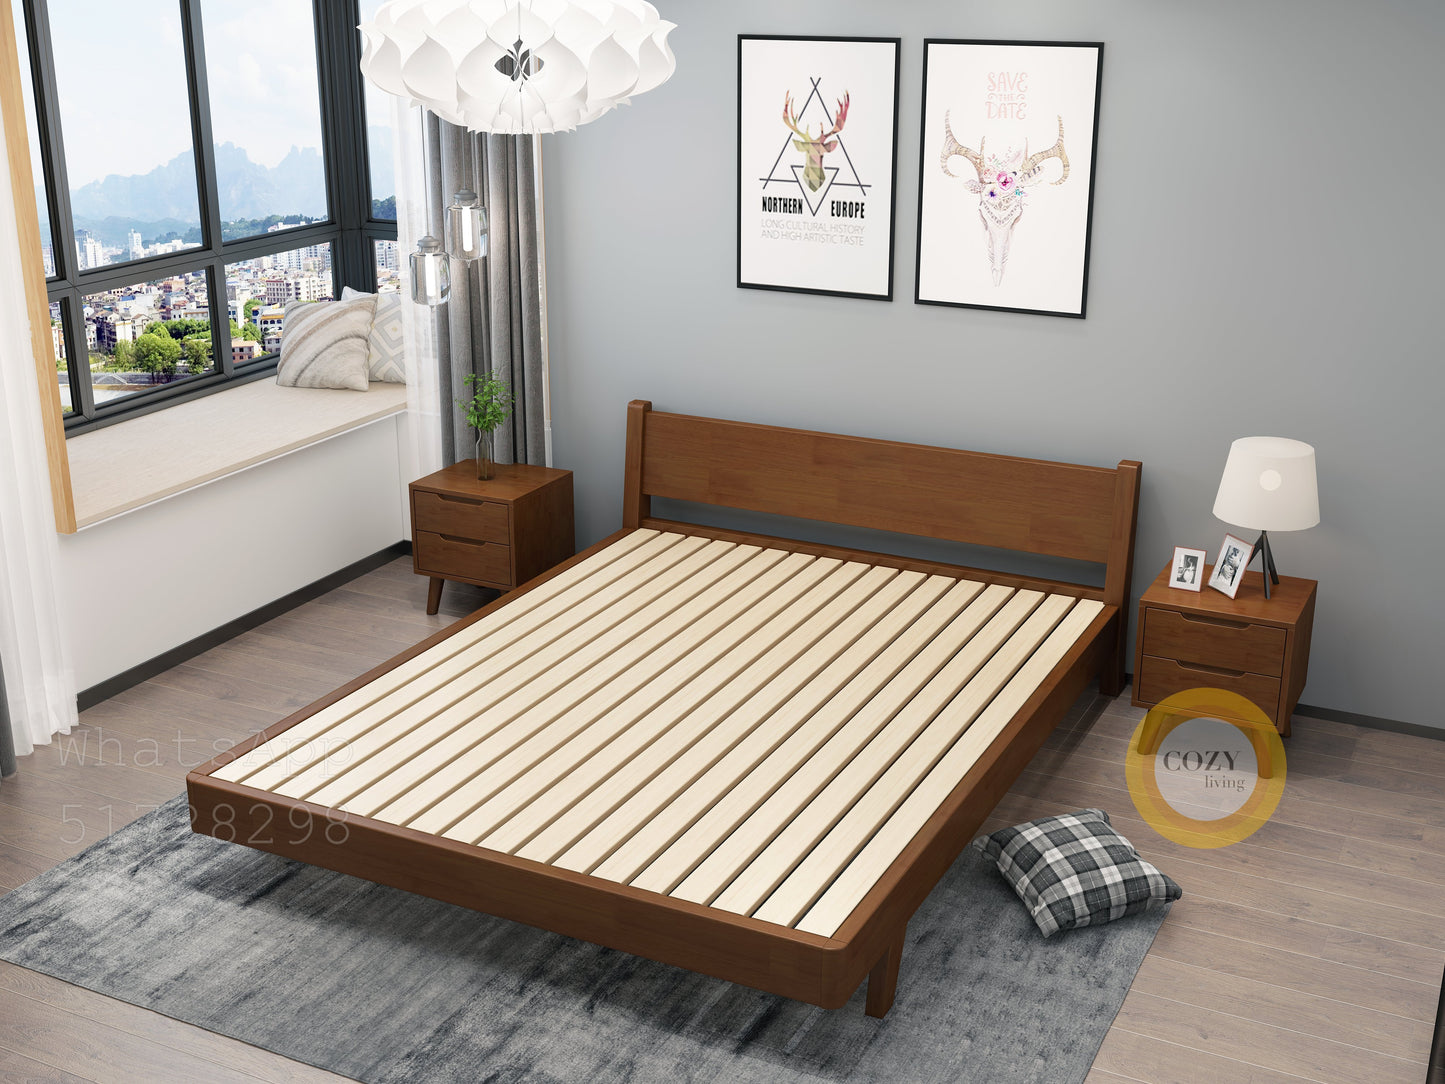 801 solid wood bed 